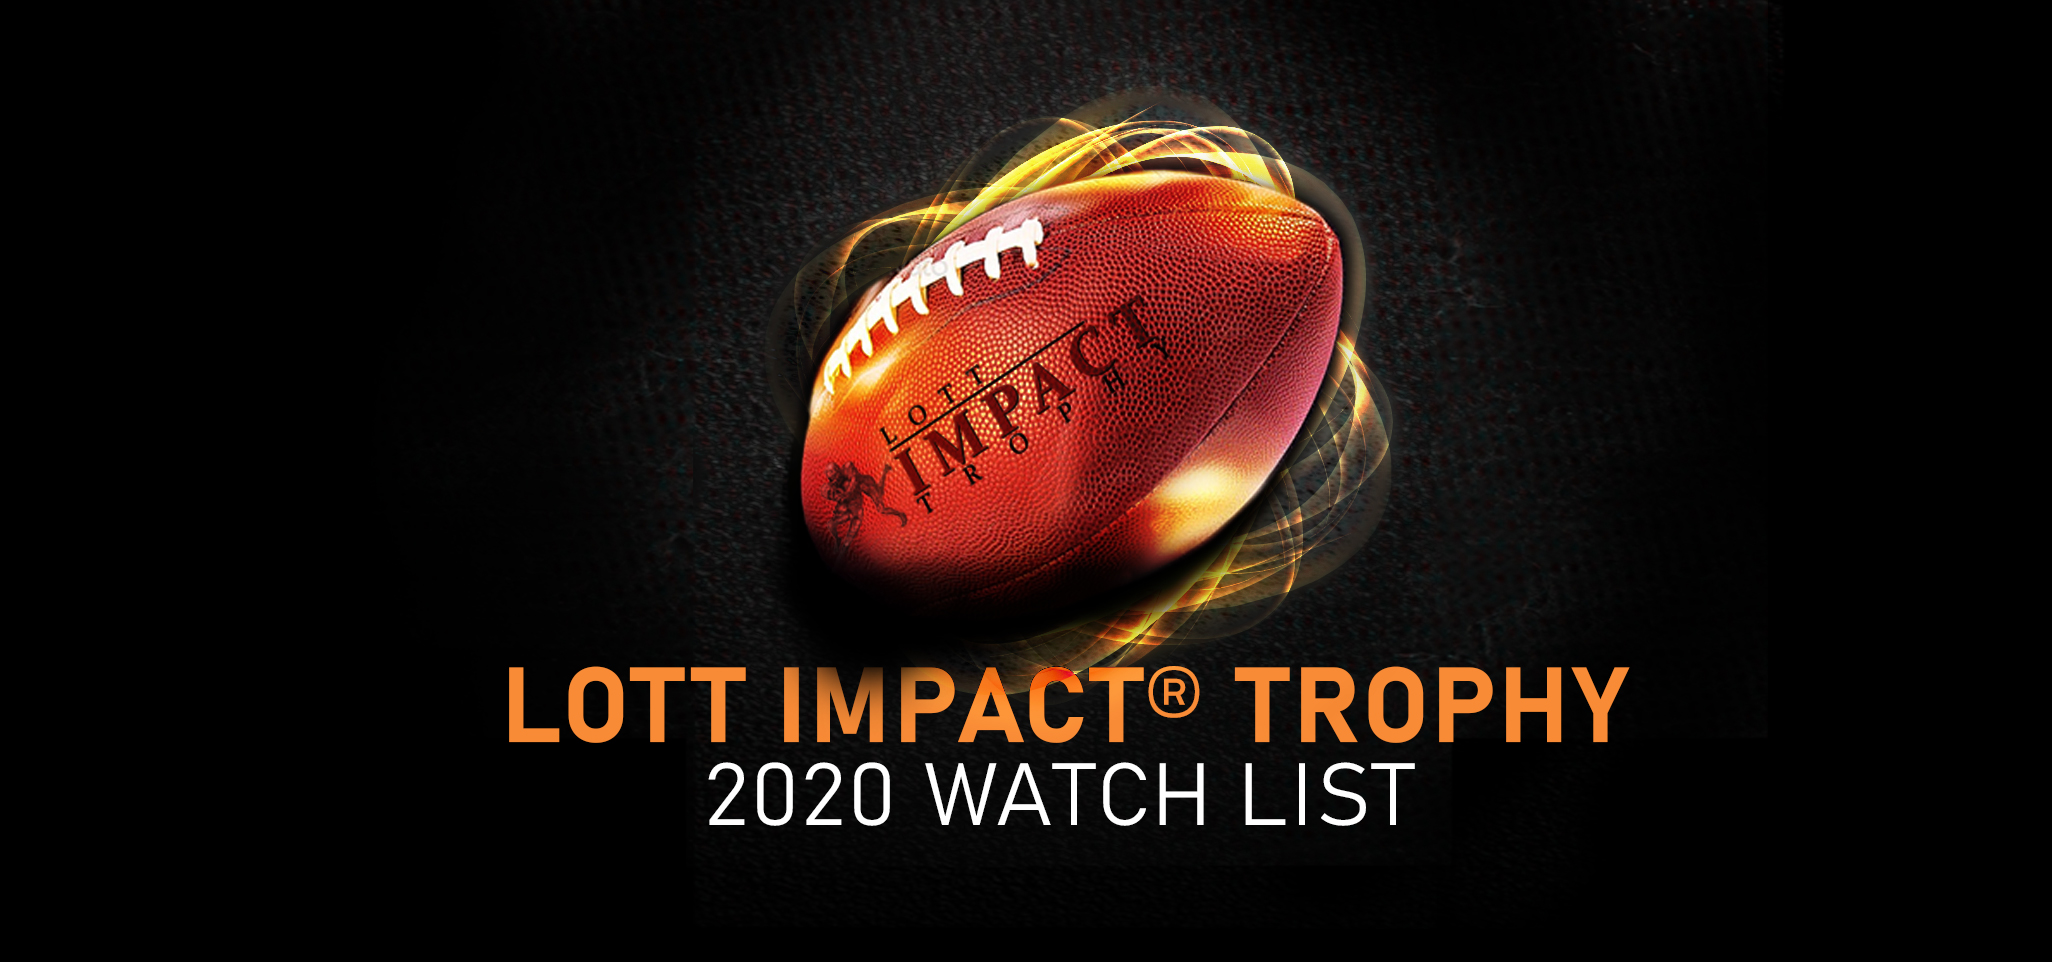 Jack Campbell of Iowa has been named the Lott IMPACT® Trophy